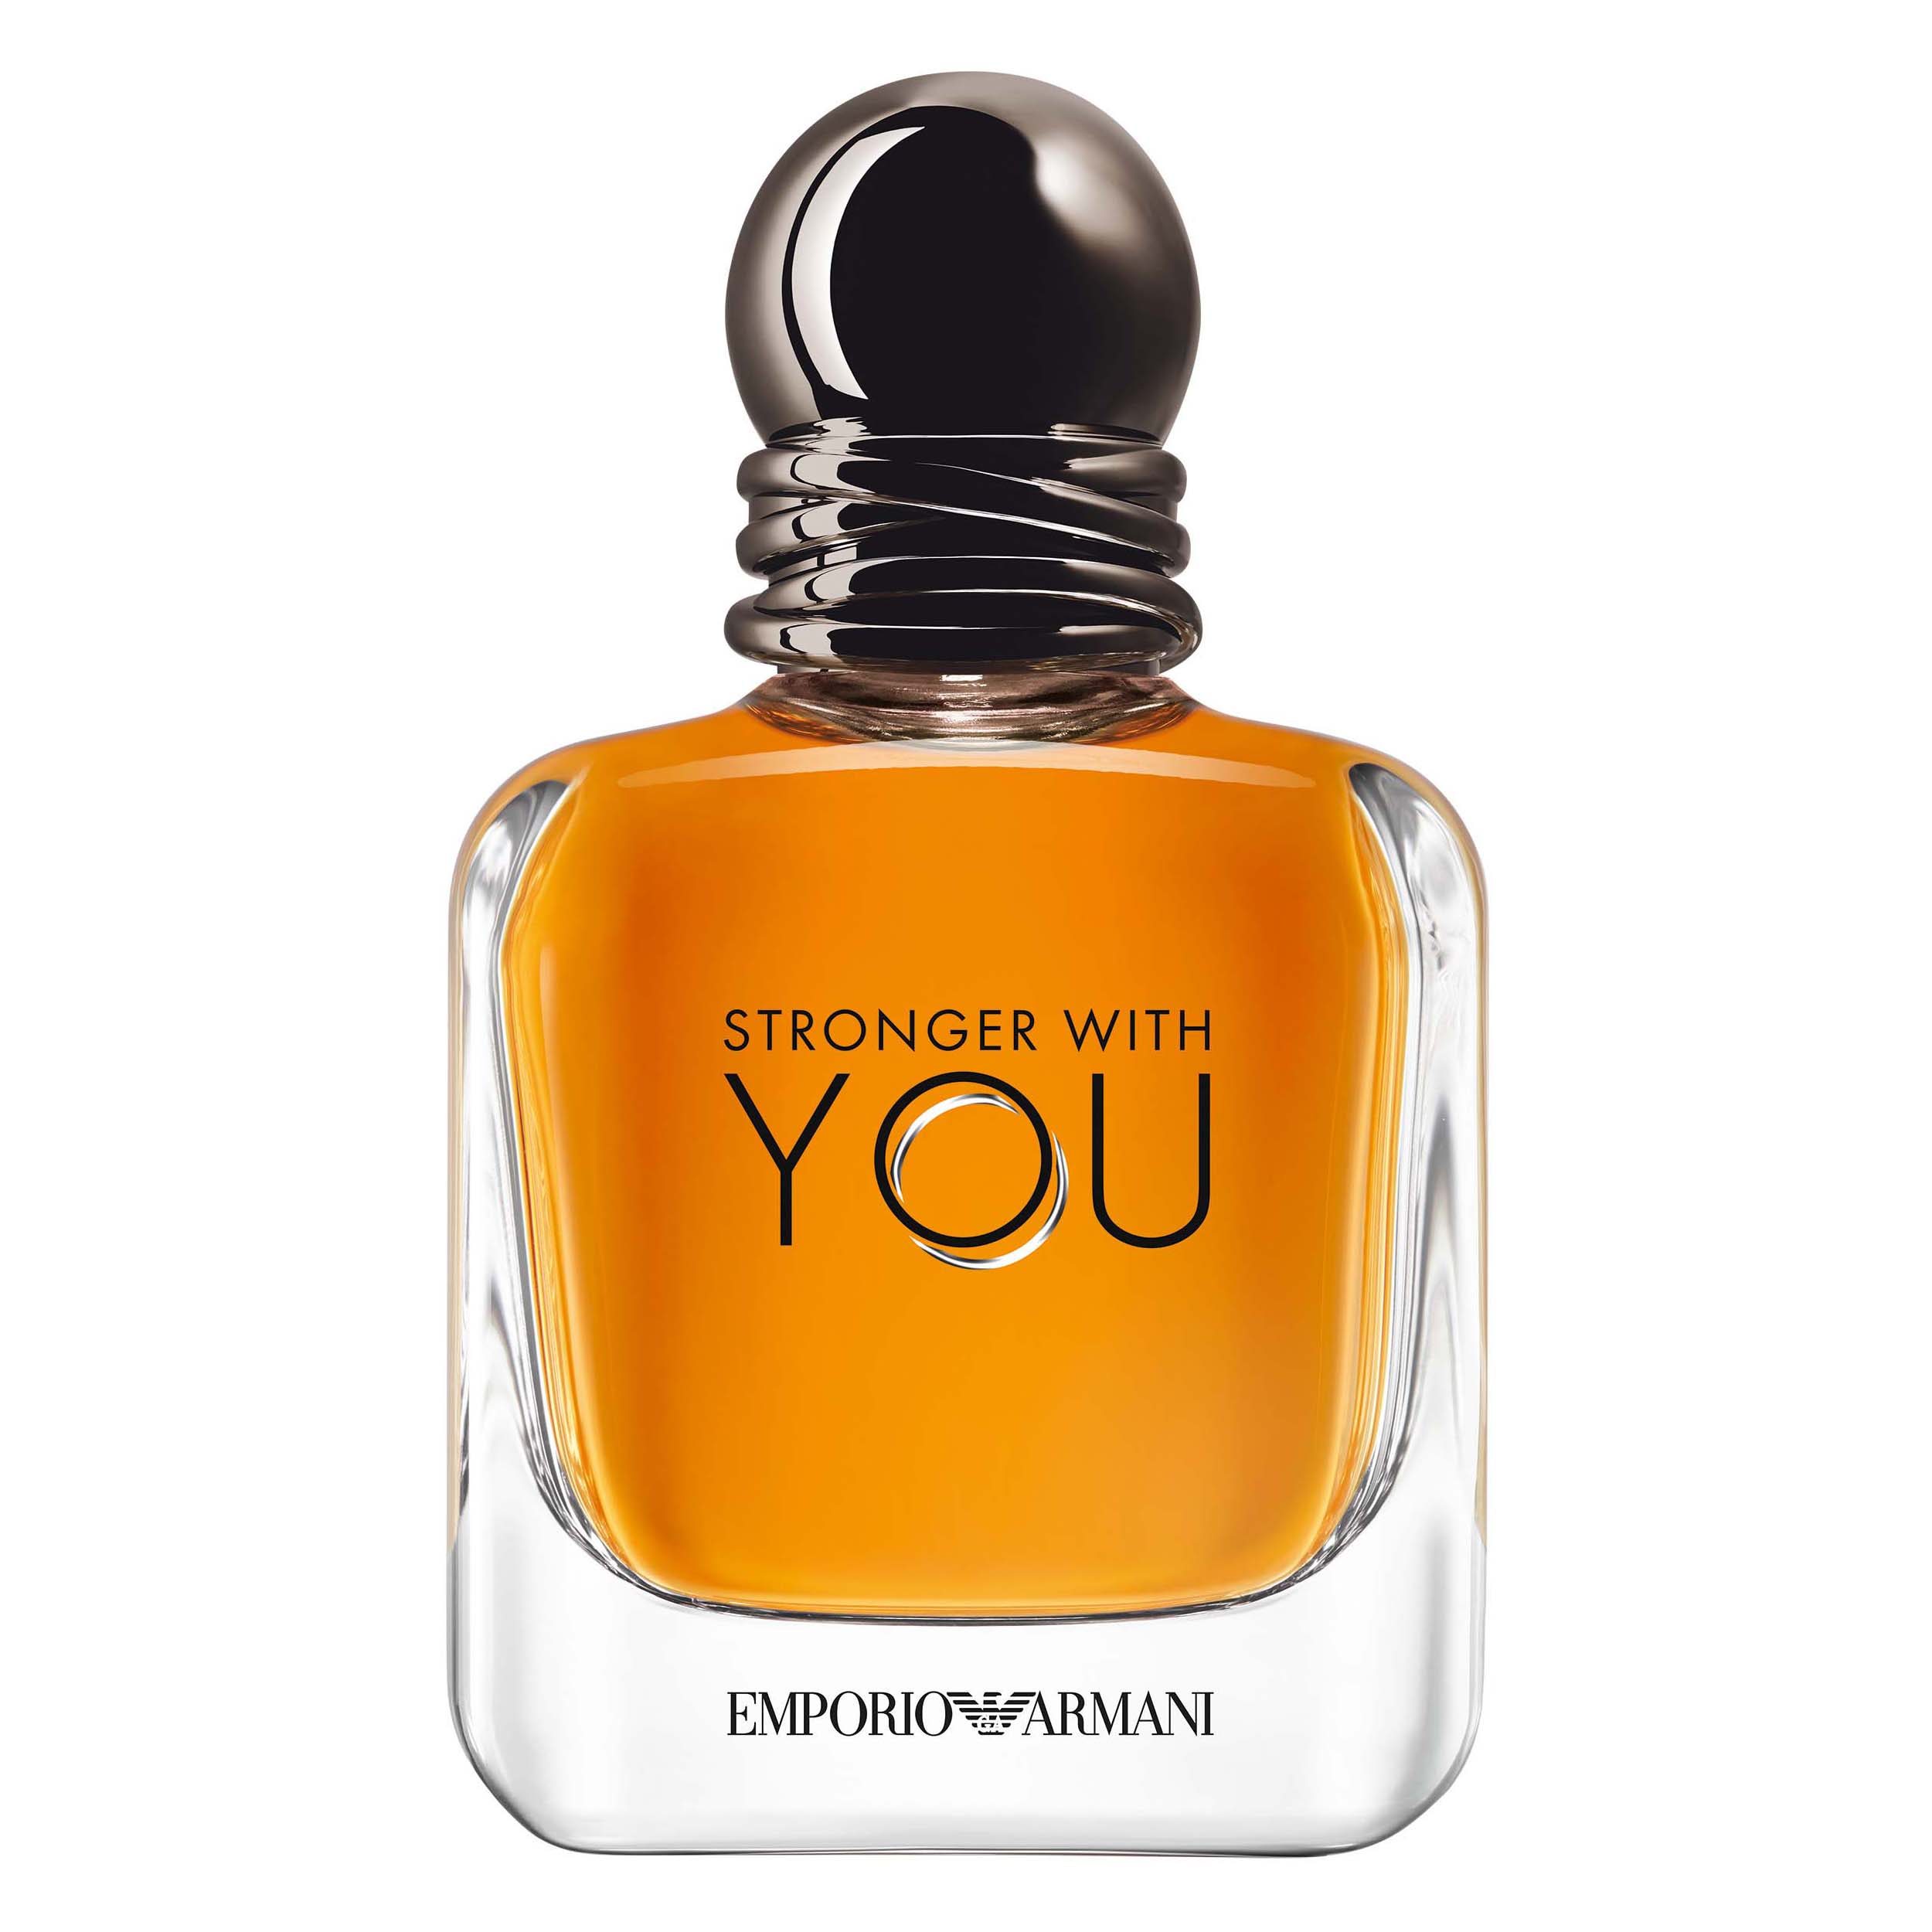 emporio-armani-stronger-with-you-edt-50ml-2067-148-0050_1